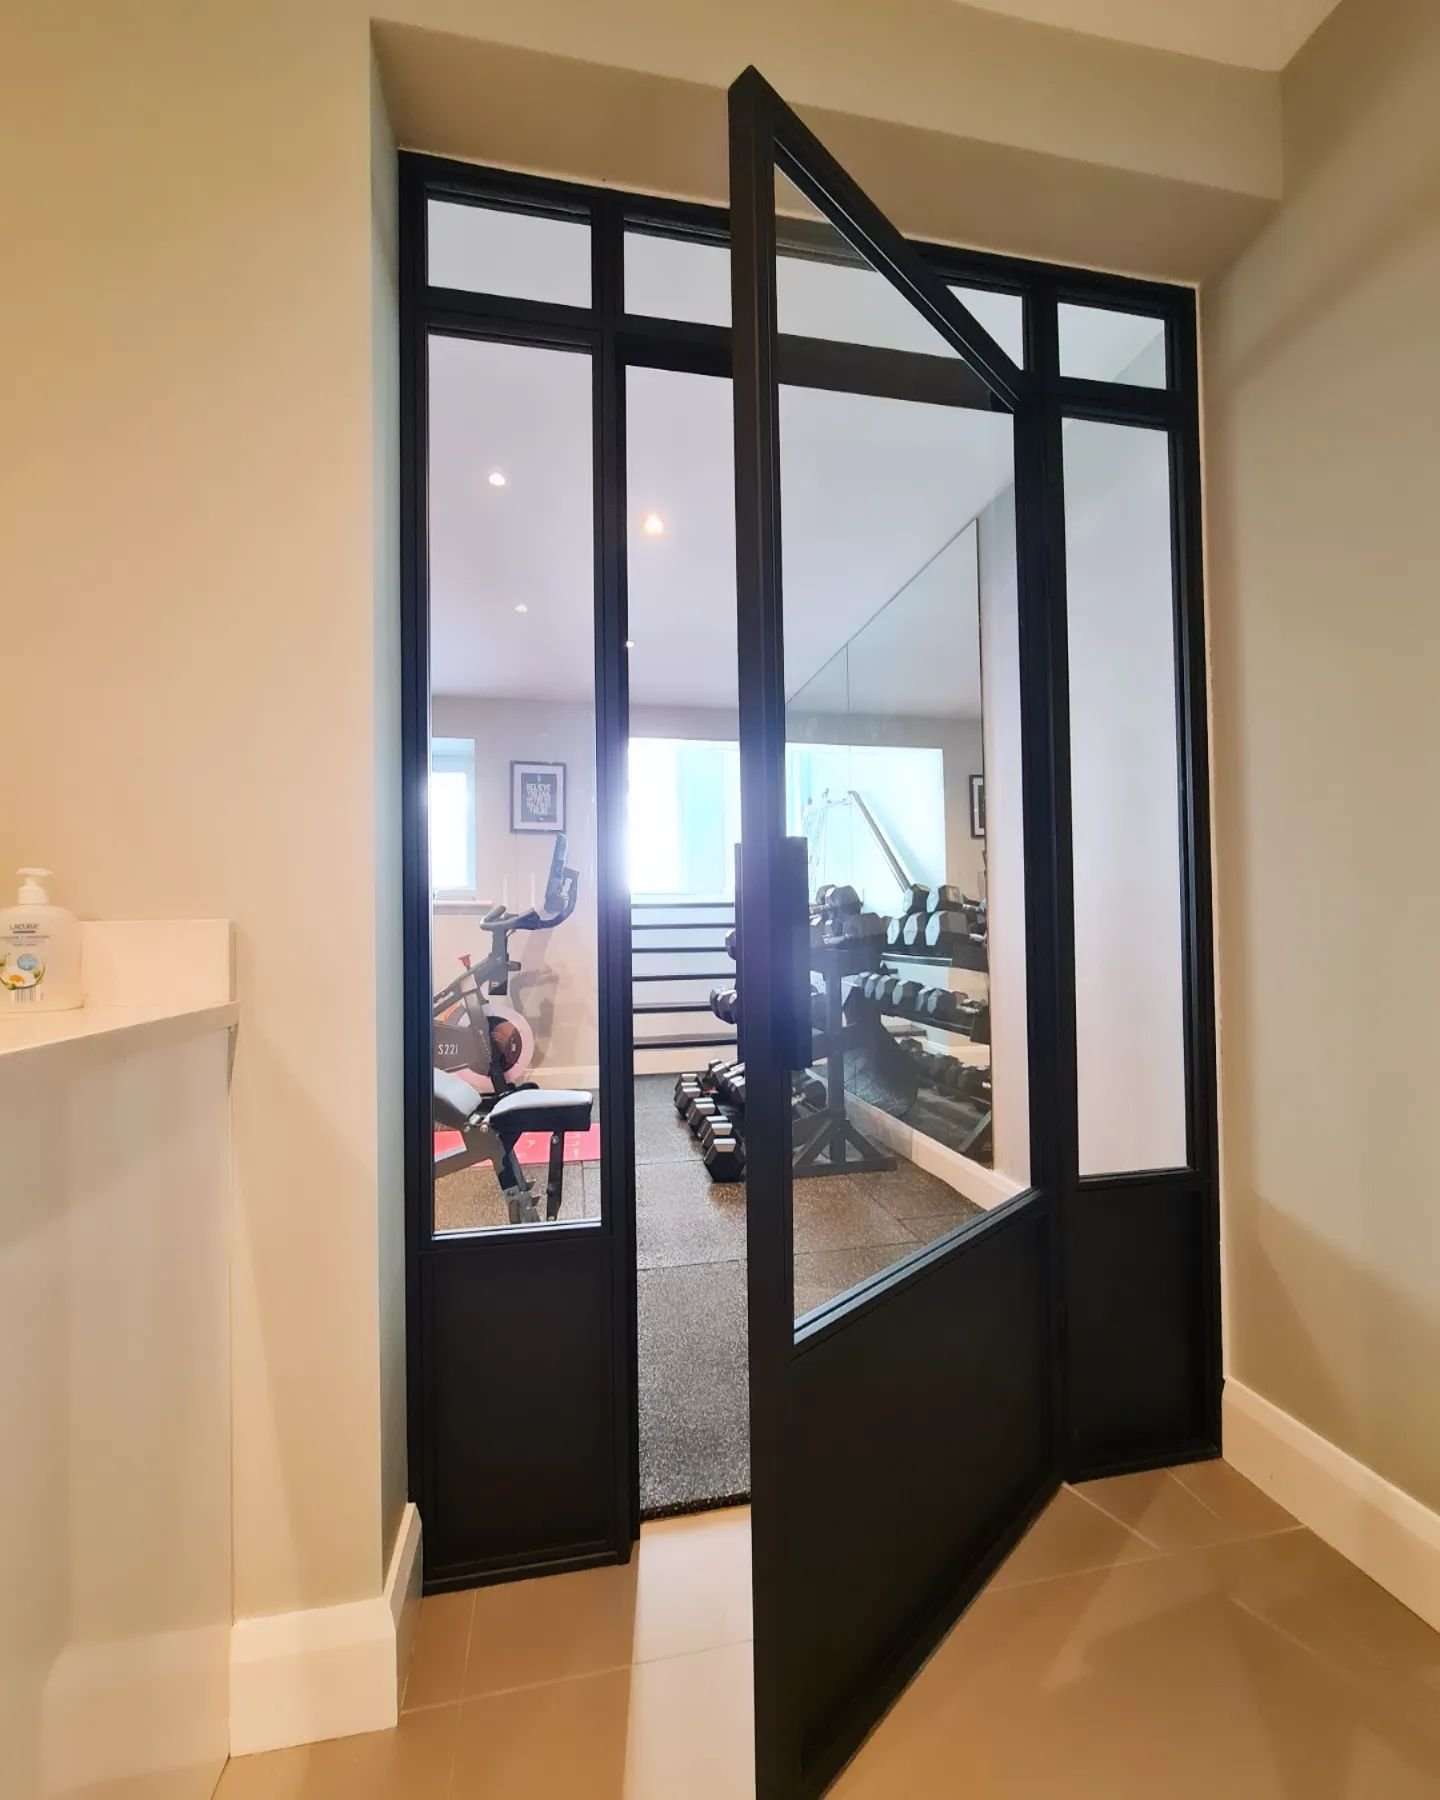 How about this amazing entrance to a personal fitness studio? 🥰

#glasspartition #moderndesign #retro
#fitnessstudio #homegym #interiordesign #steeldoors #roomdivider #glasswall #crittallstyle #wellness
#newyorkstyle #personalfitness #naturallightin